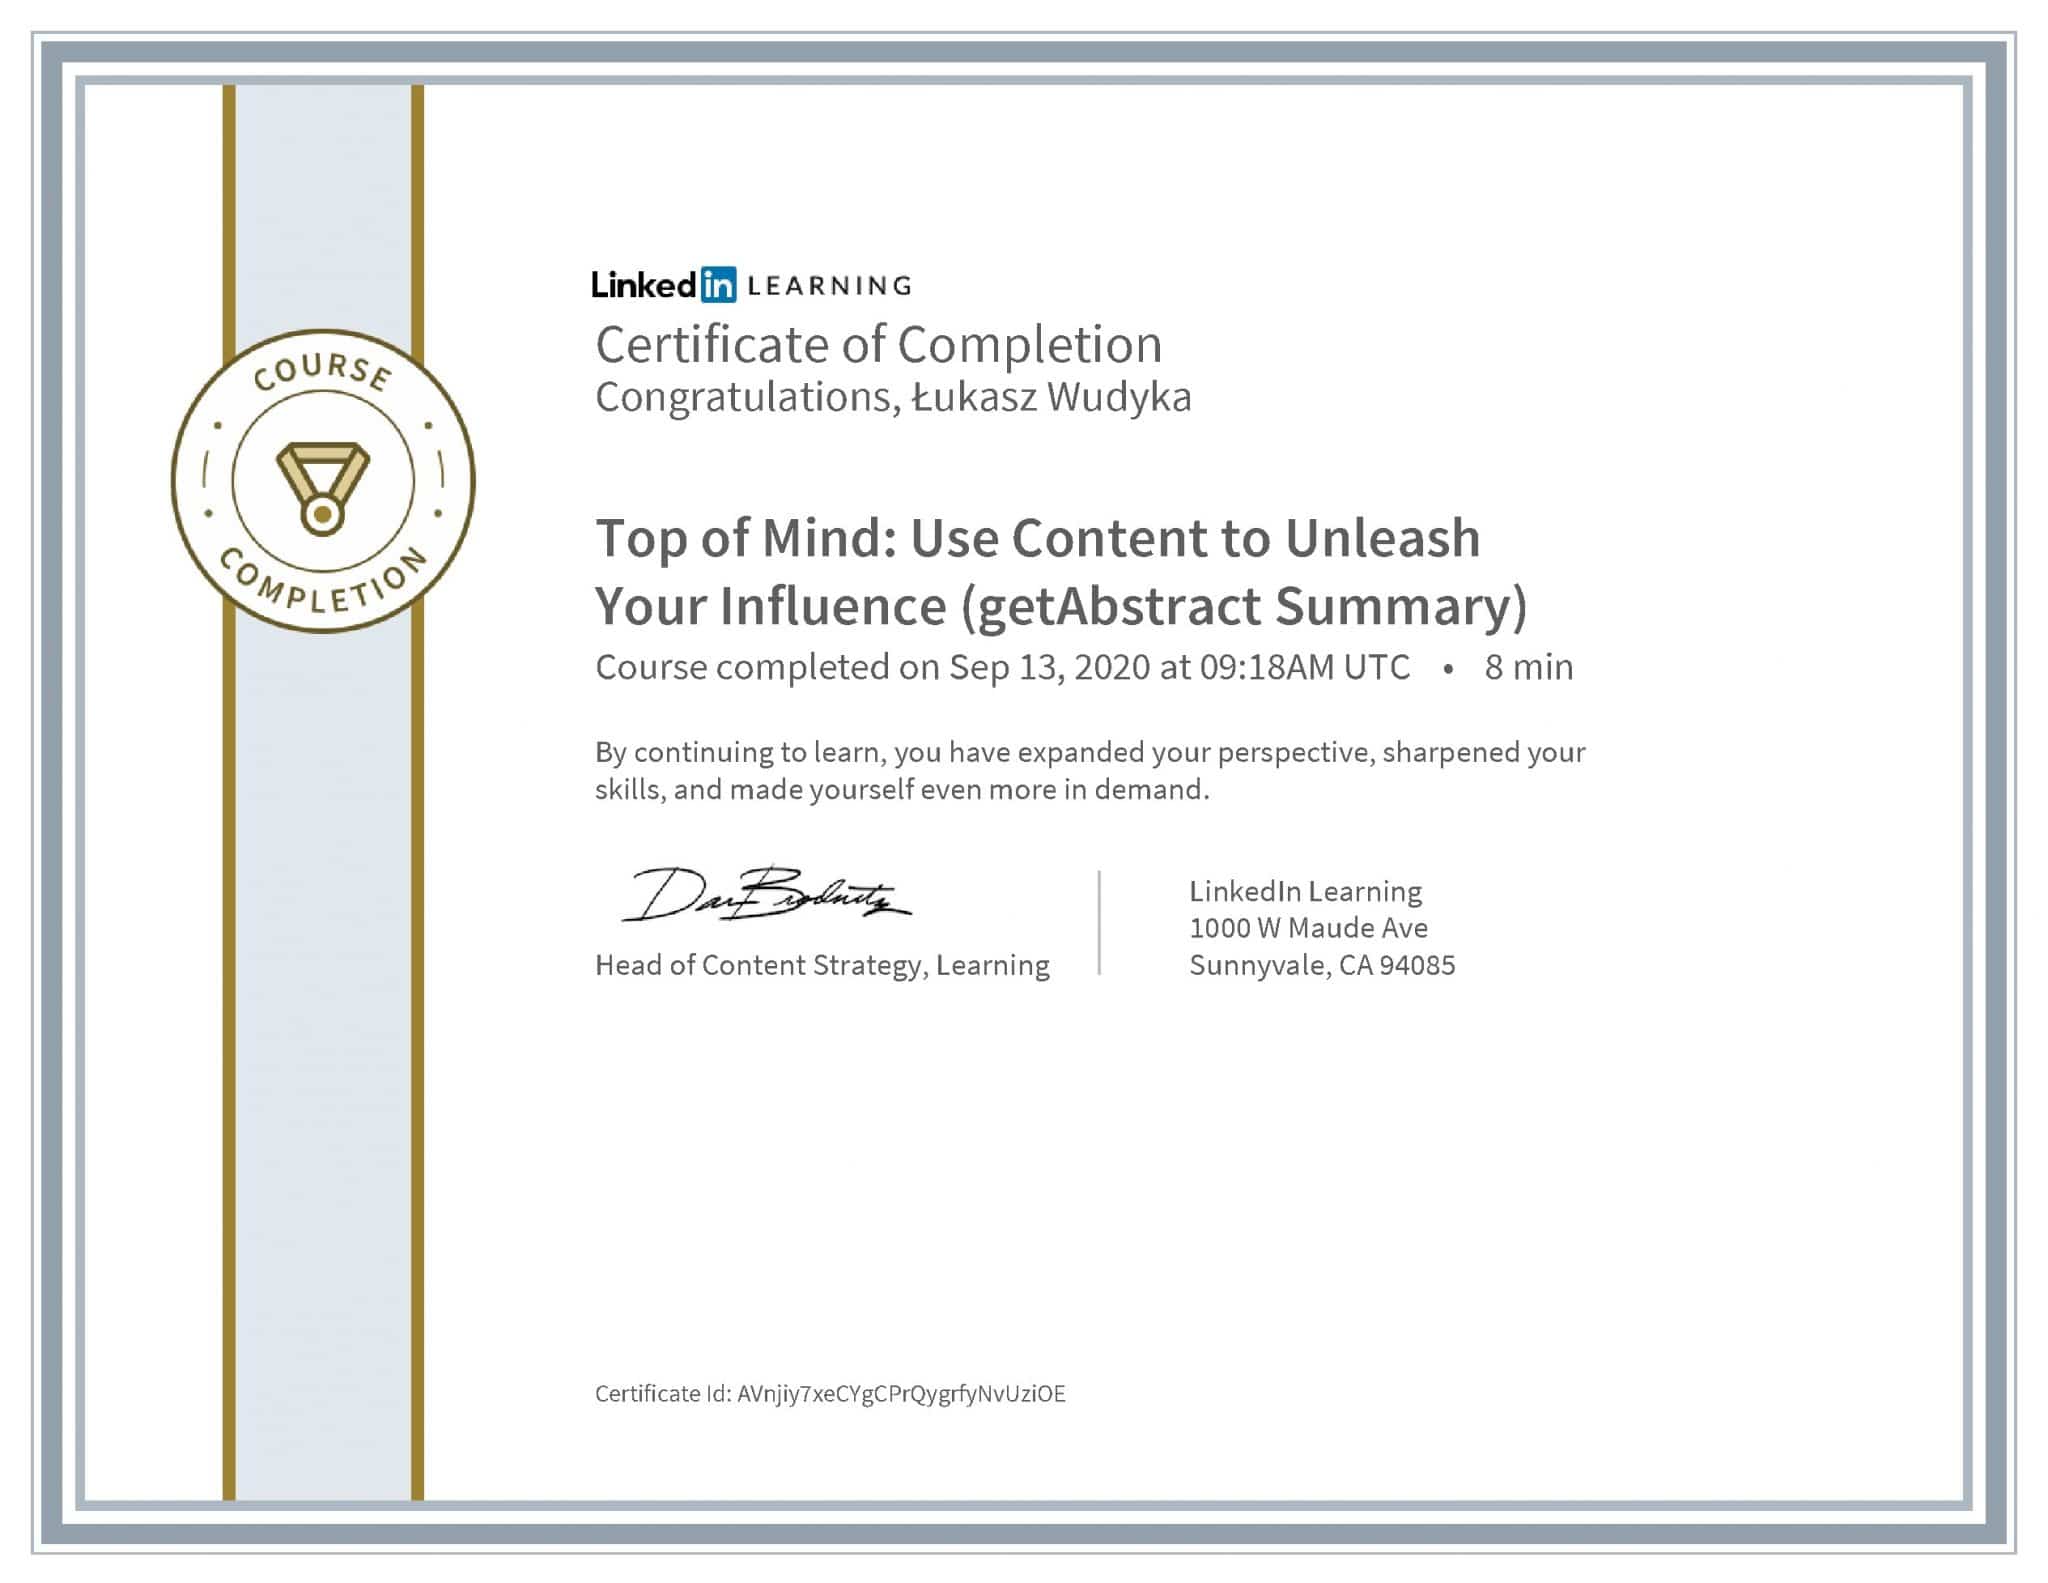 Łukasz Wudyka certyfikat LinkedIn Top of Mind: Use Content to Unleash Your Influence (getAbstract Summary)